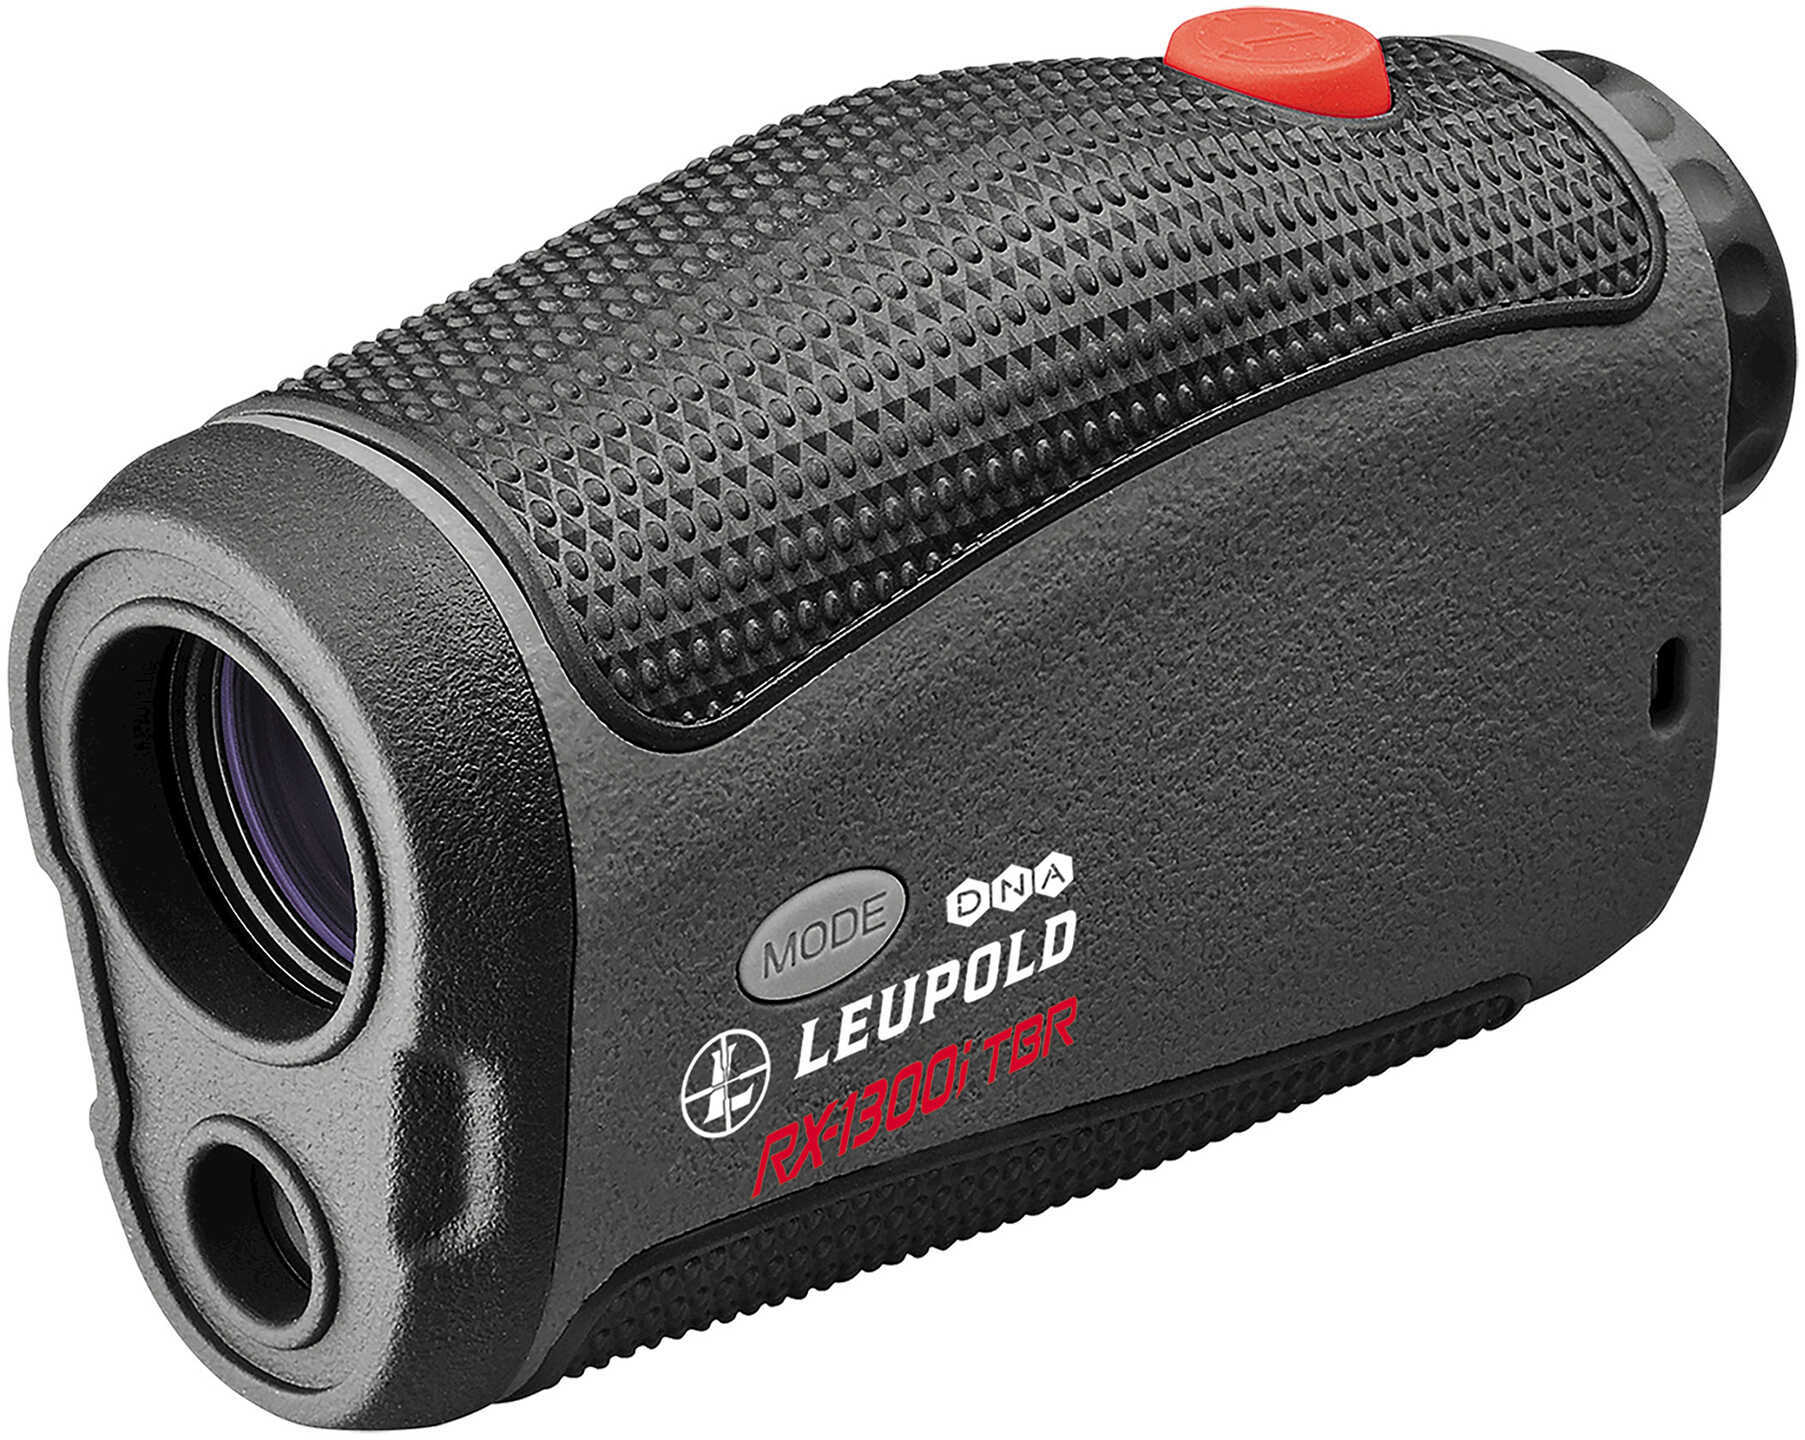 Leupold RX-1300i TBR/W with DNA Laser Rangefinder 6x Selectable, Black and Gray